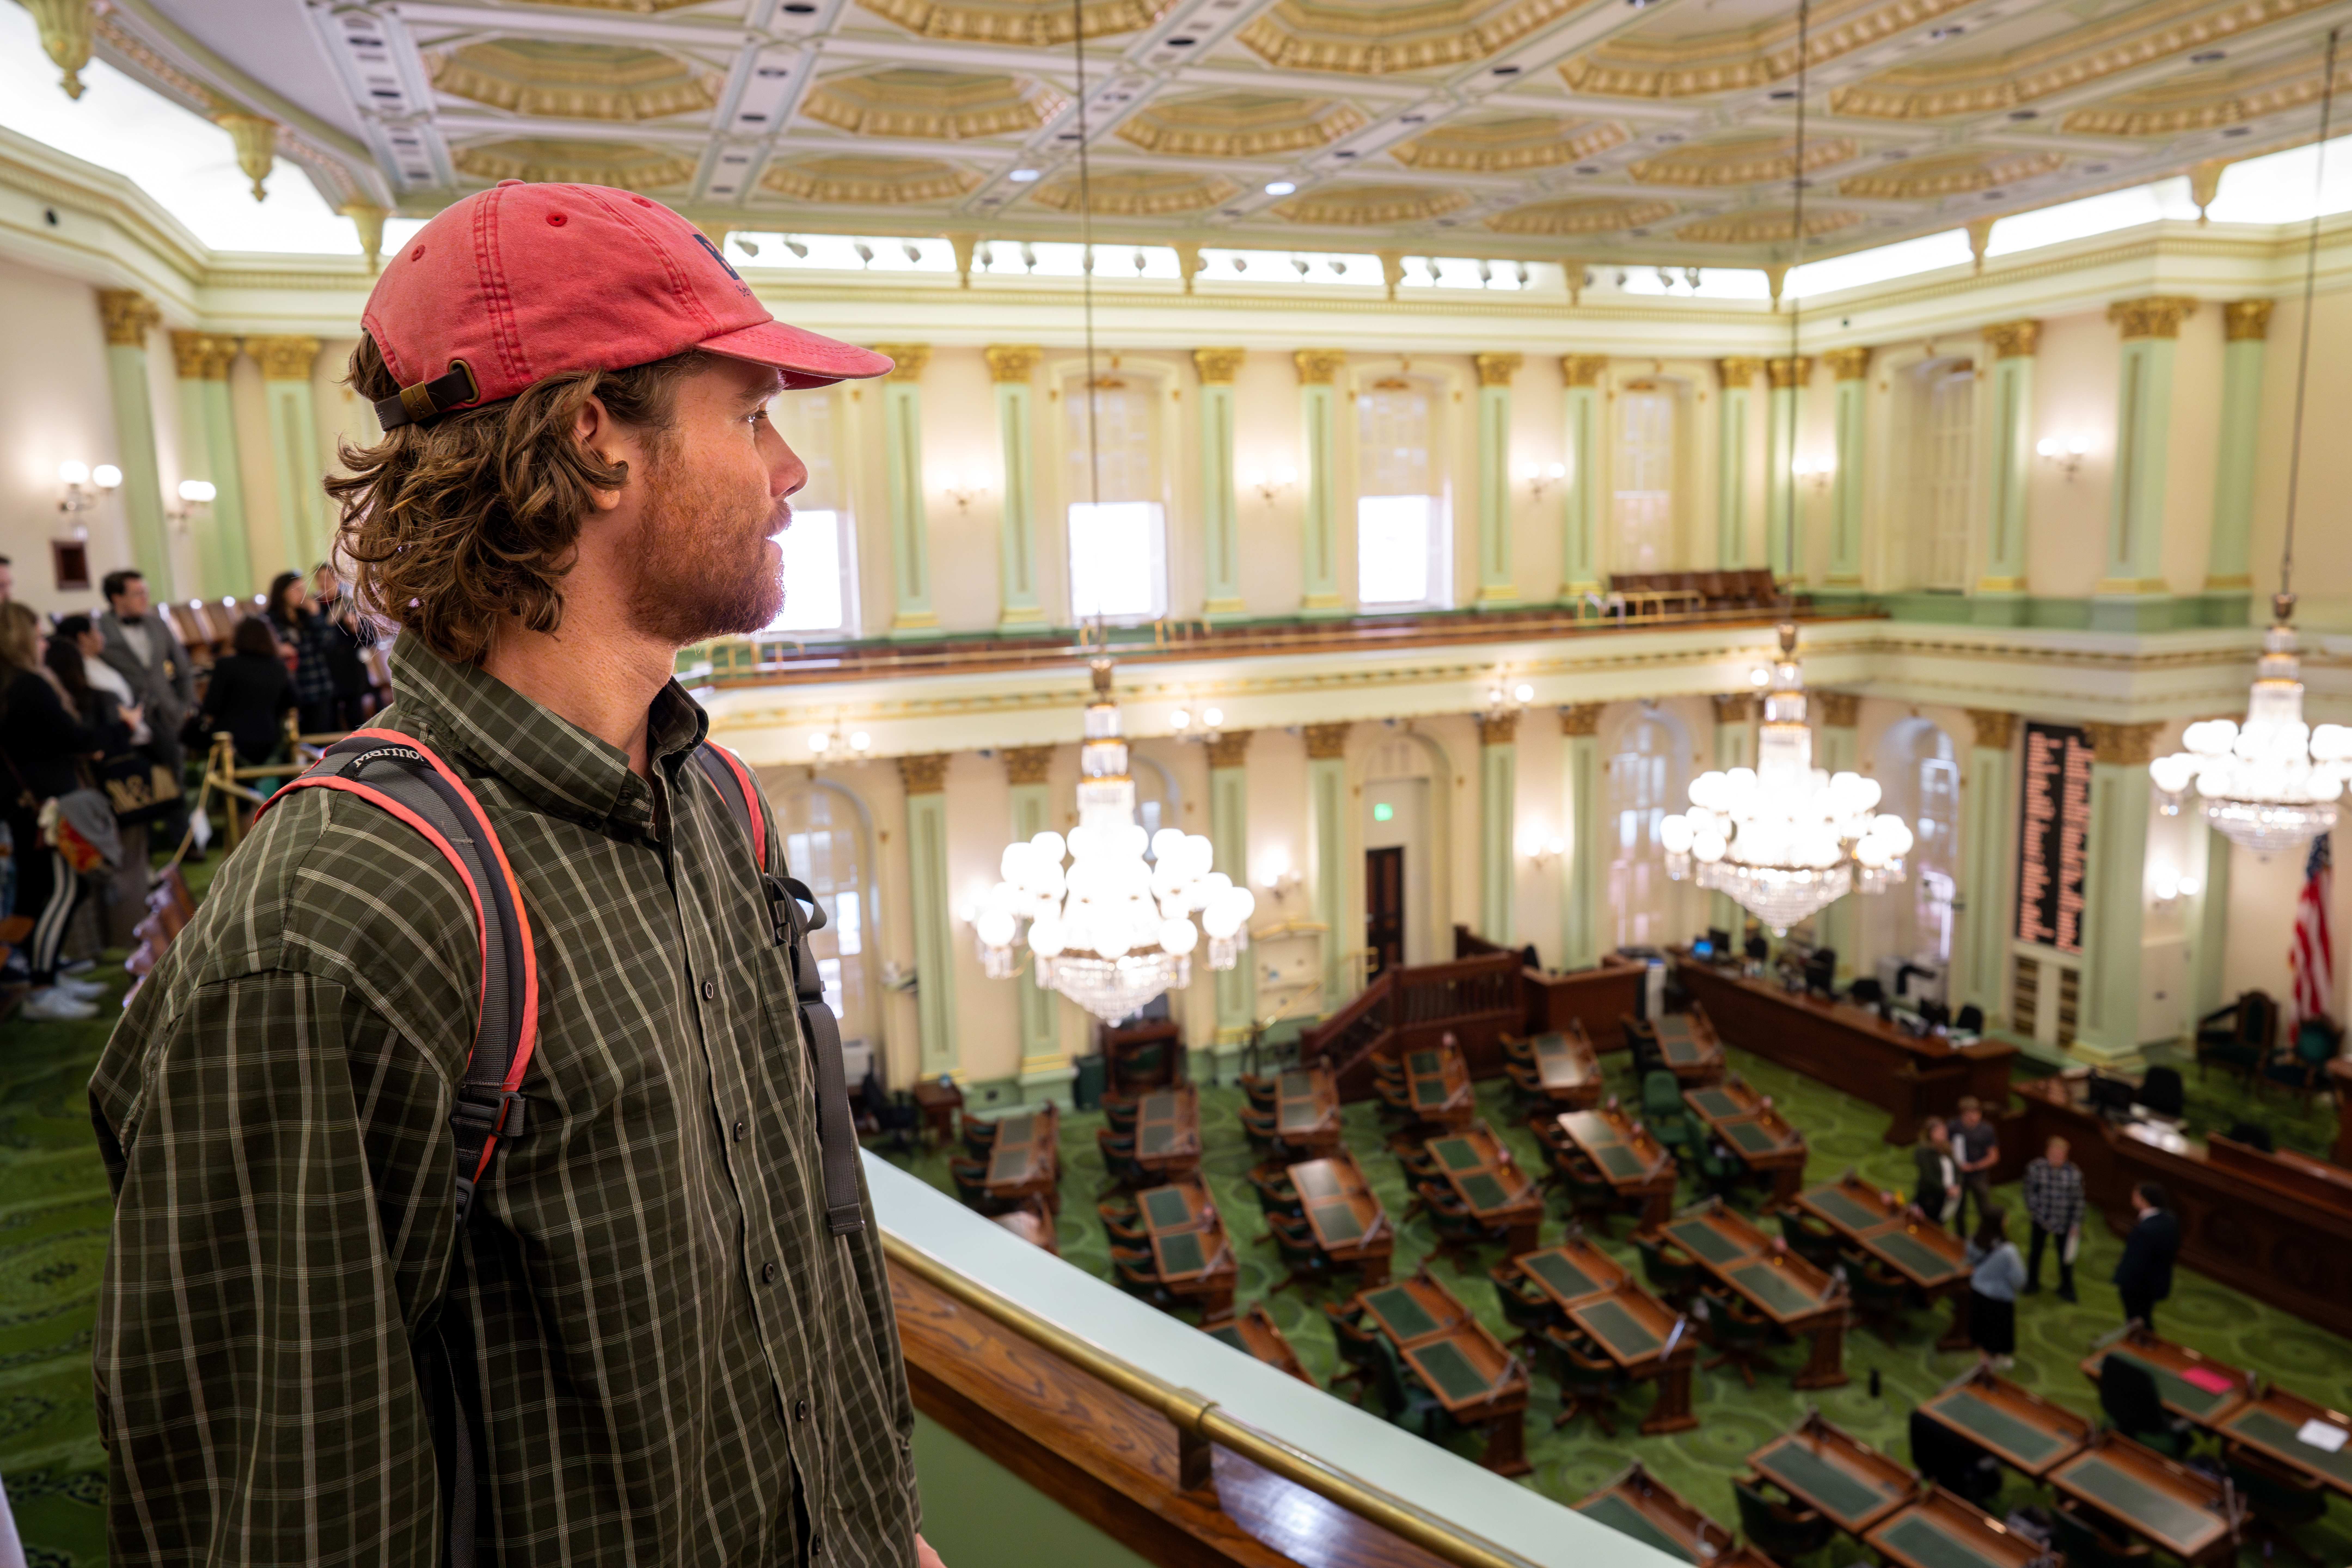 Future EPM student Sam Stromberg featured at the CA State Capitol